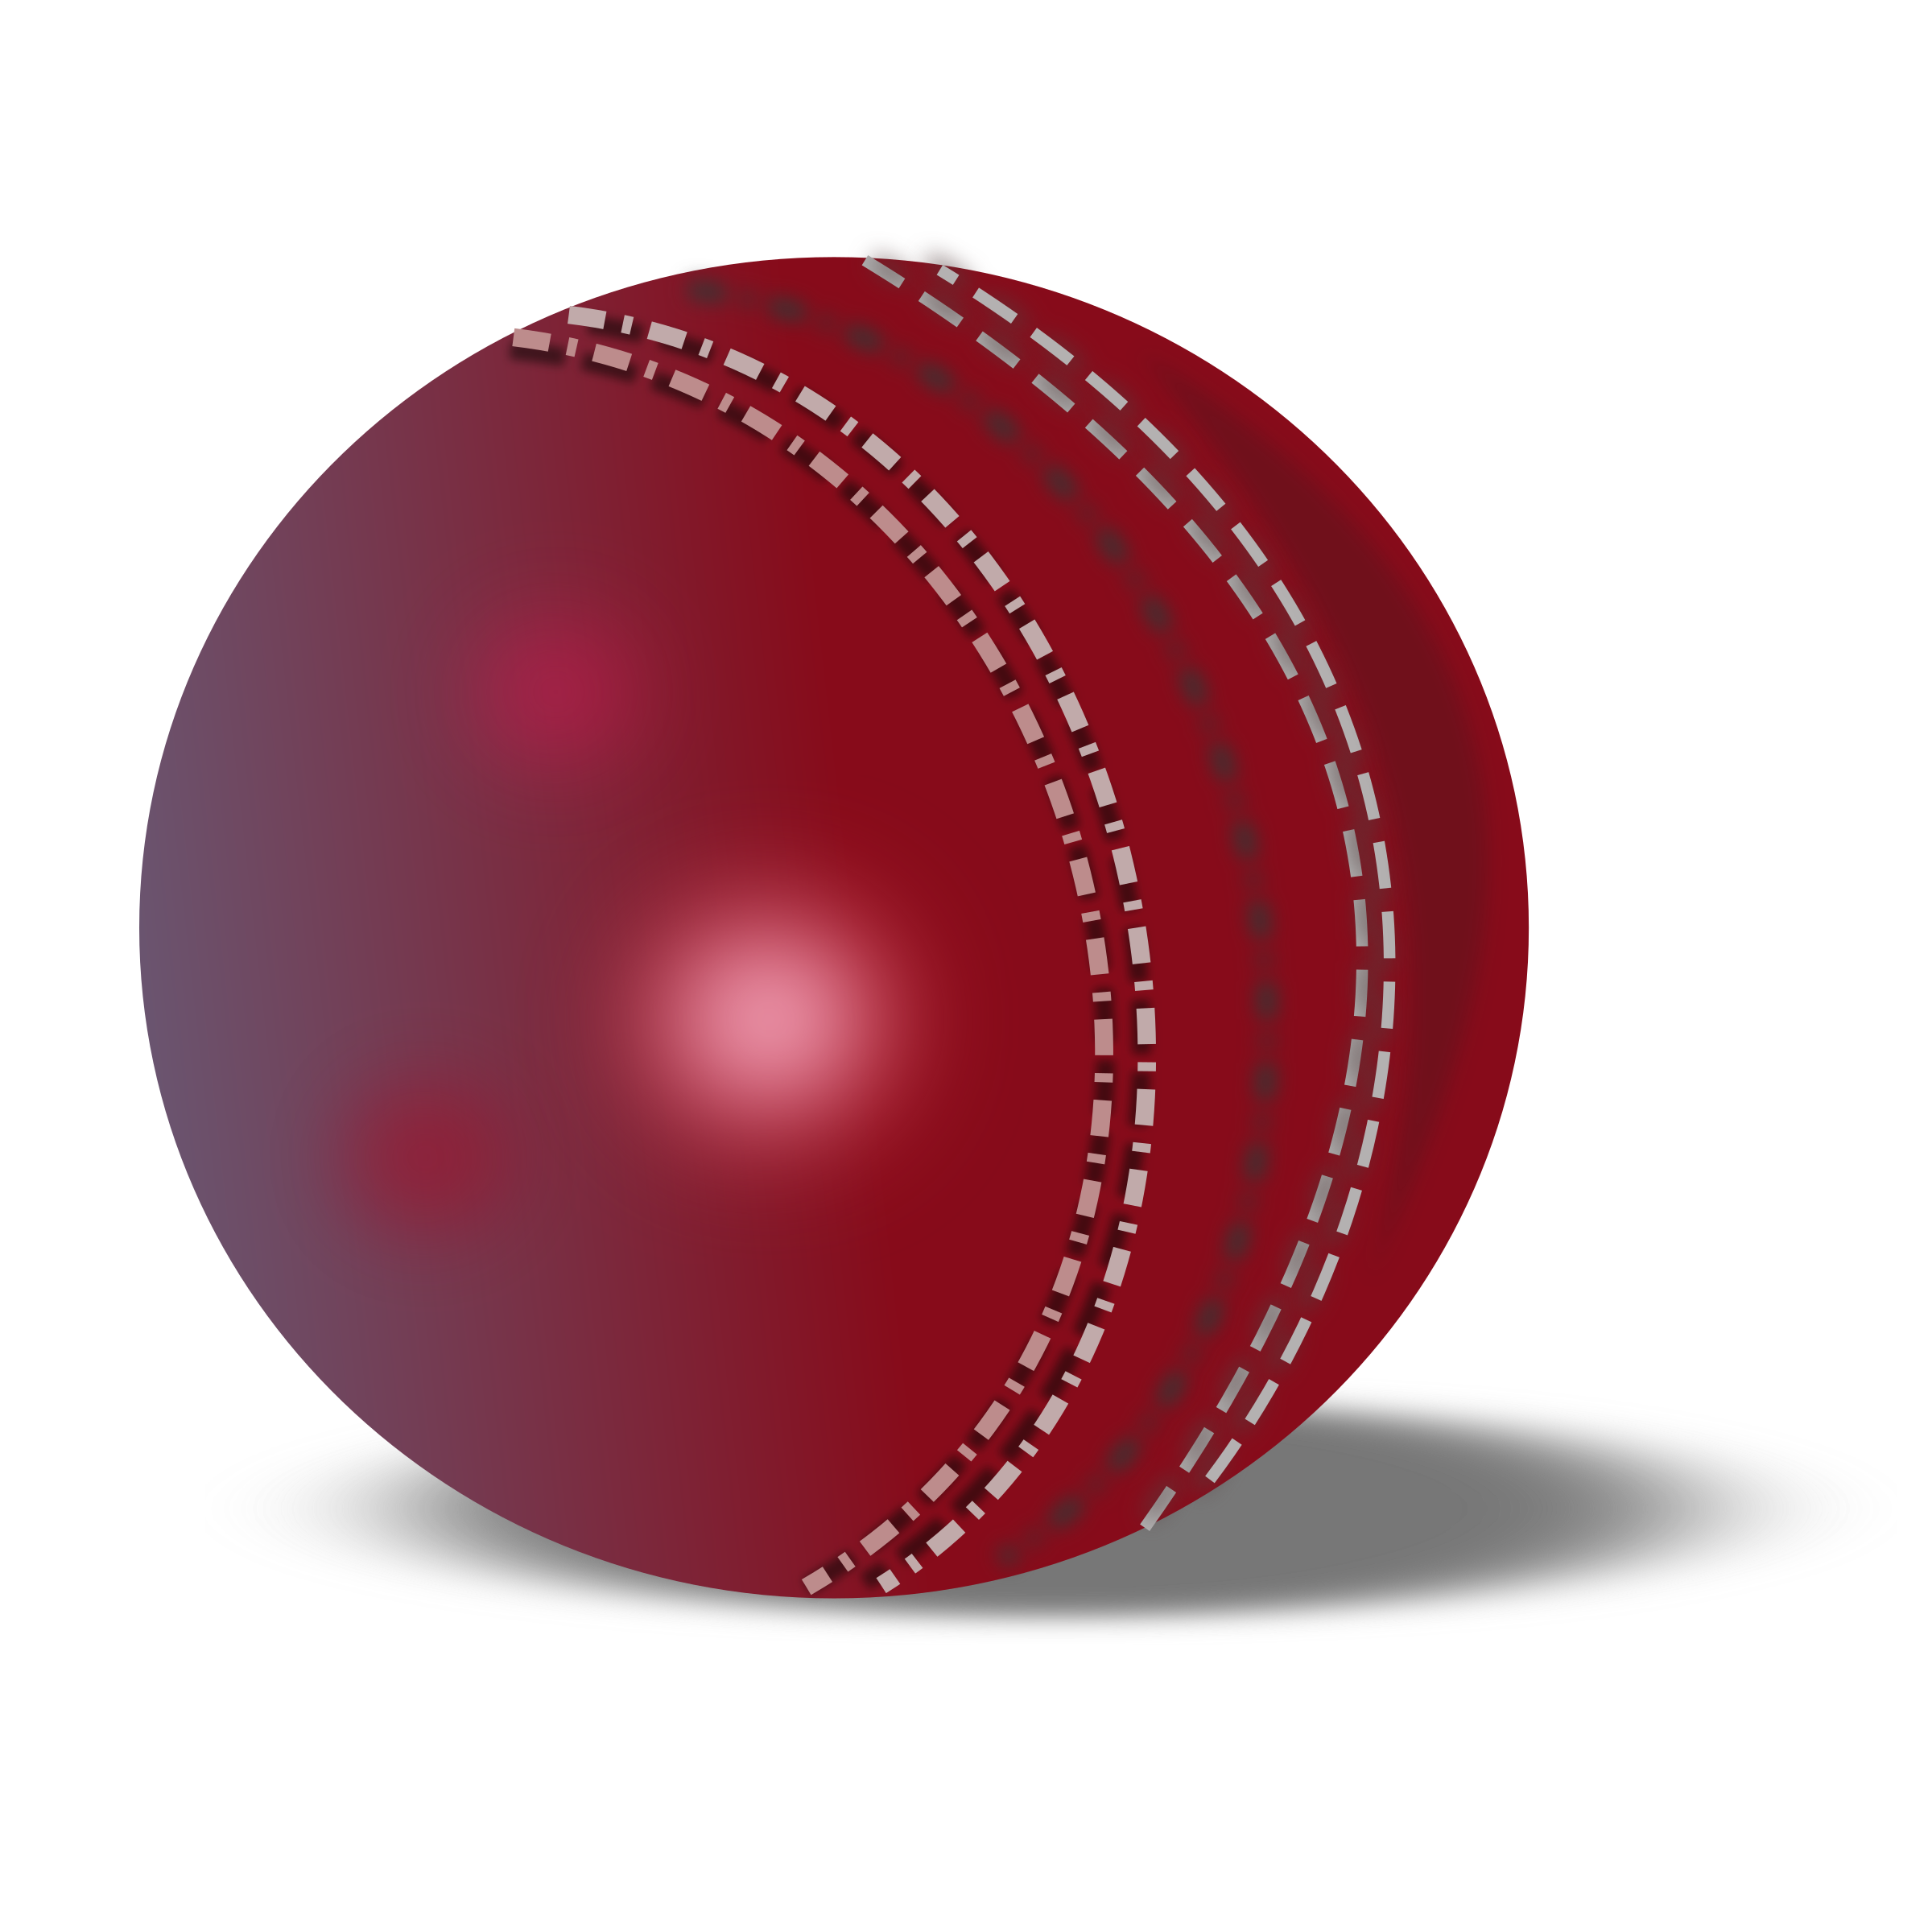 Free Ball Transparent, Download Free Ball Transparent png images, Free ...